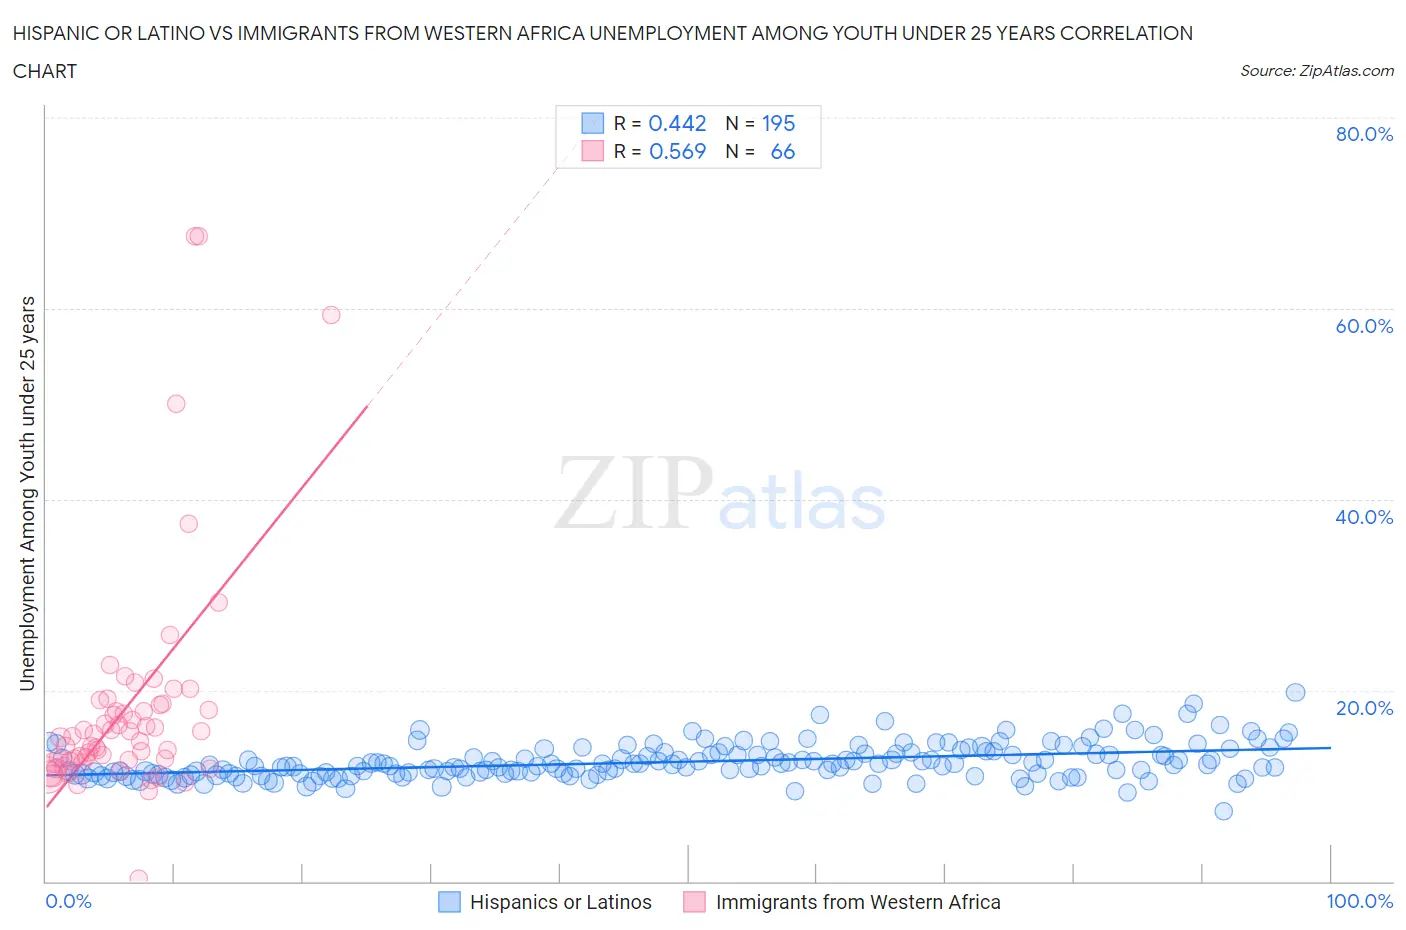 Hispanic or Latino vs Immigrants from Western Africa Unemployment Among Youth under 25 years